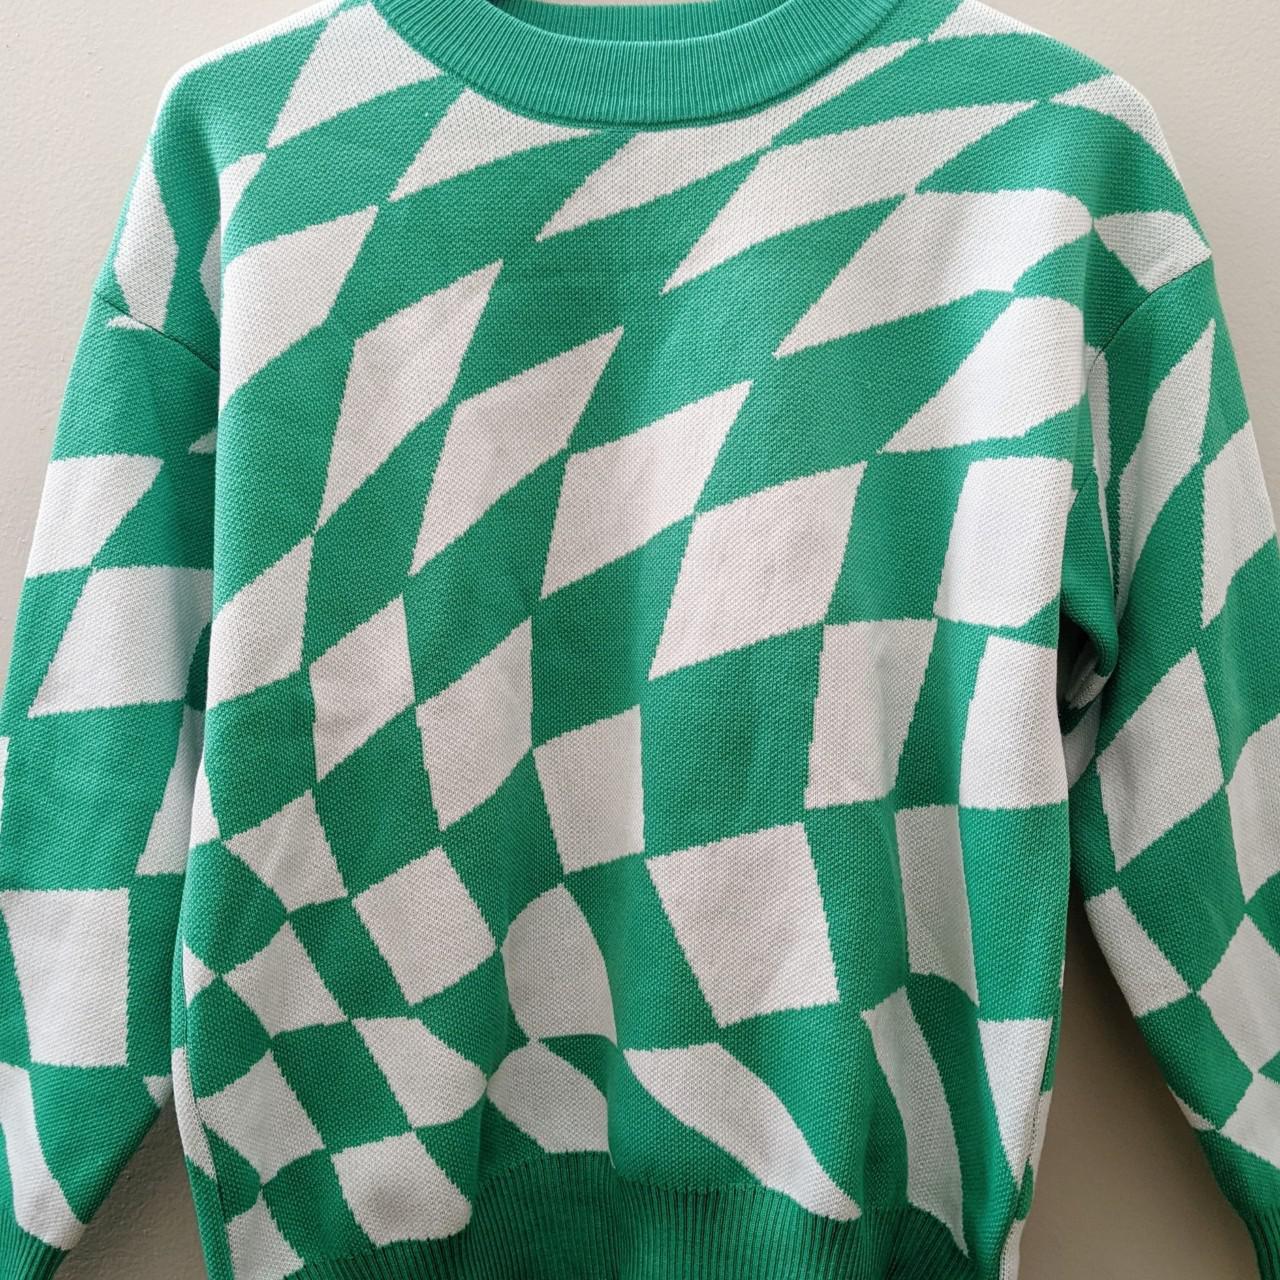 Product Image 2 - ✅✅ Warped checker print pullover